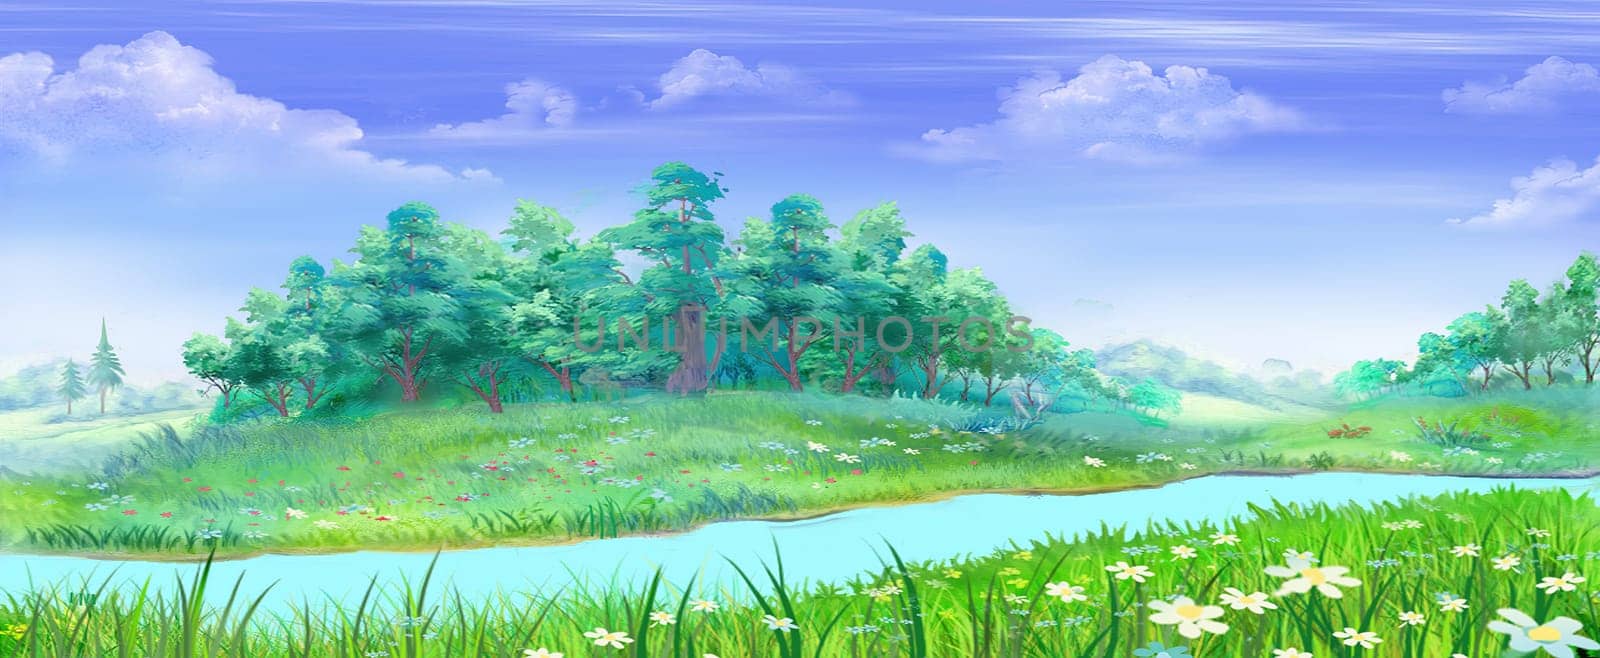 River near the forest landscape illustration by Multipedia